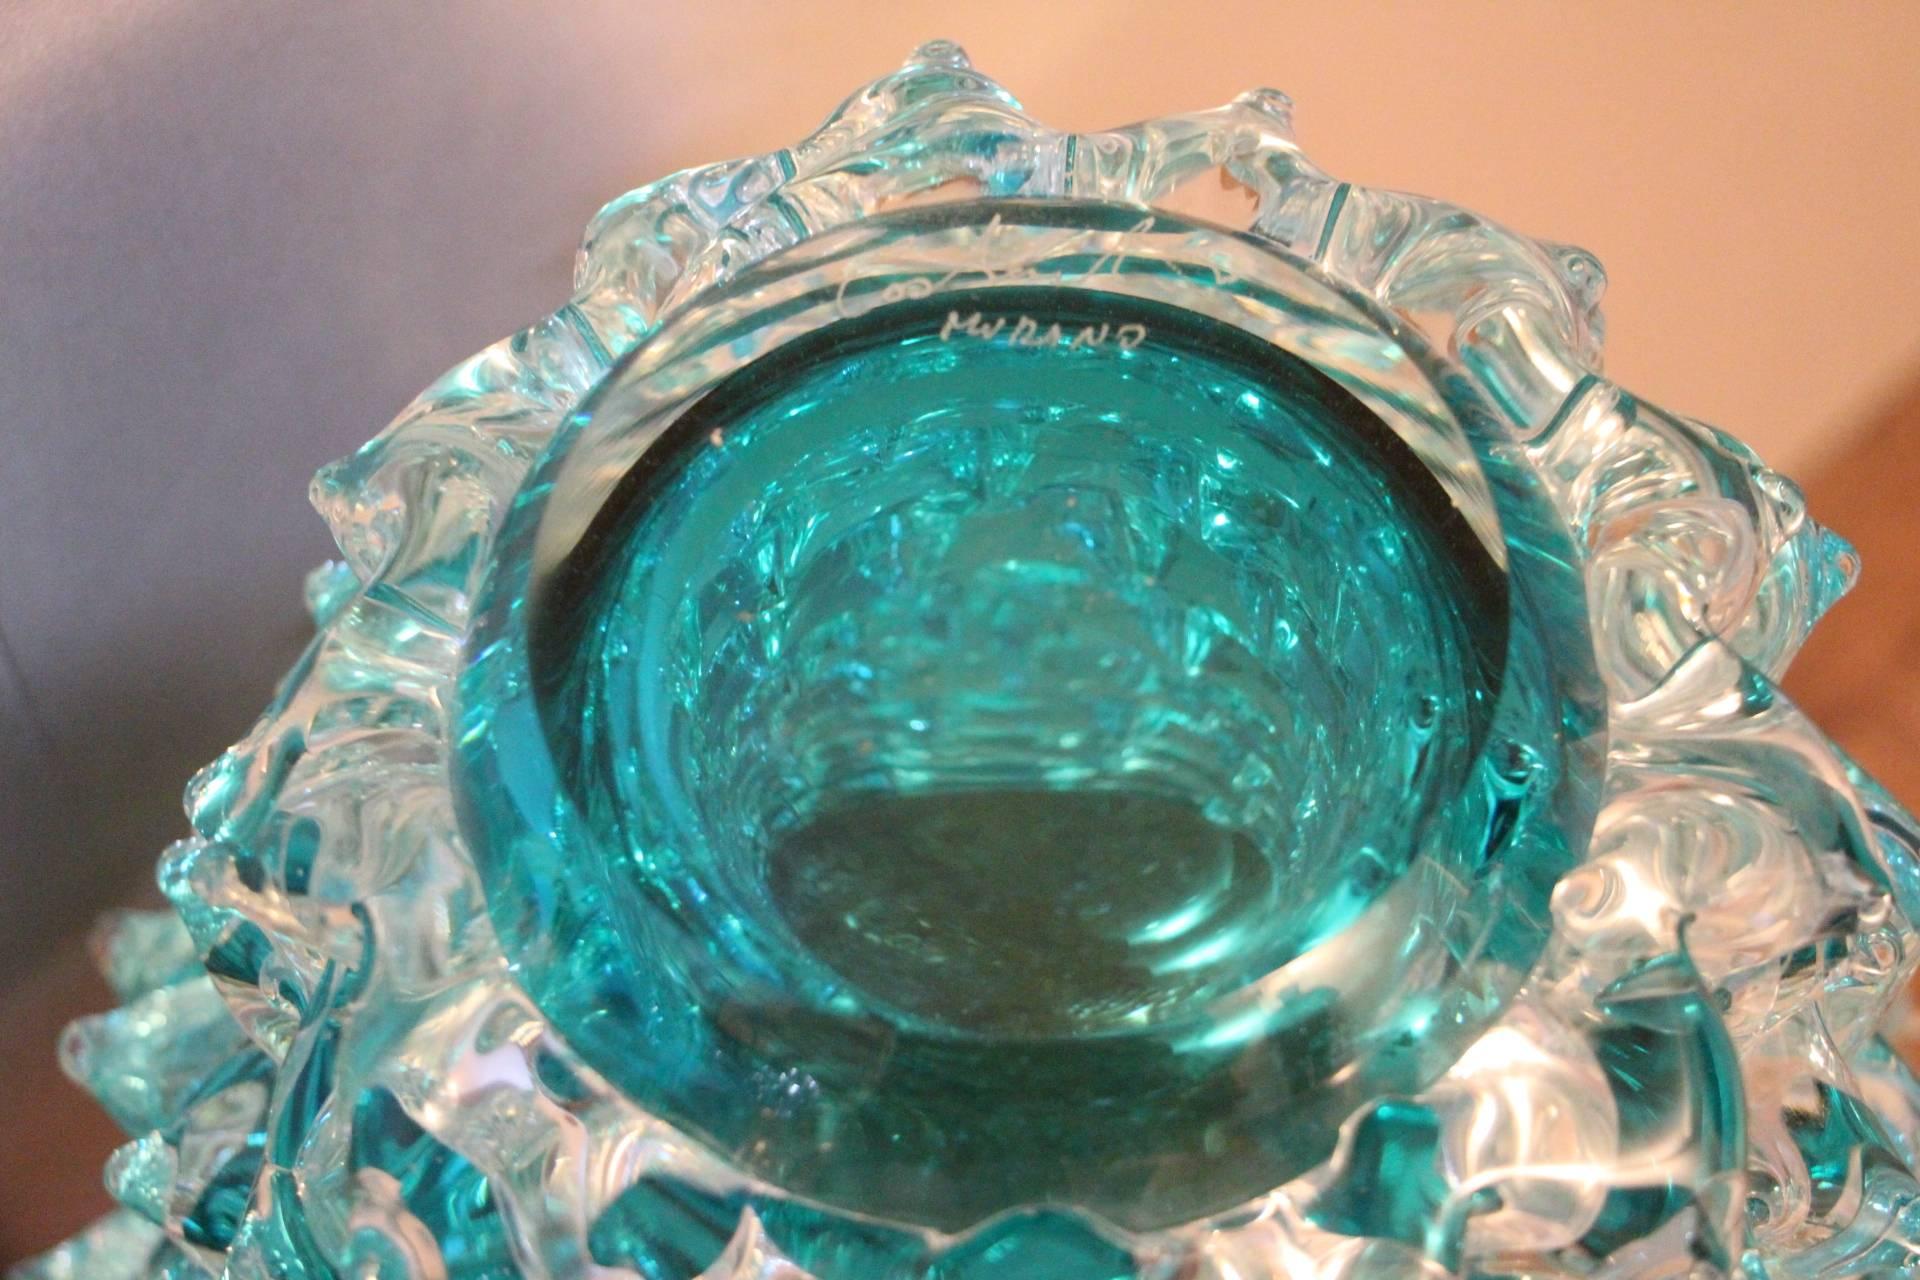 Turquoise Blue Vase in Murano Glass with Spikes Decor, Barovier Style, Rostrato 8